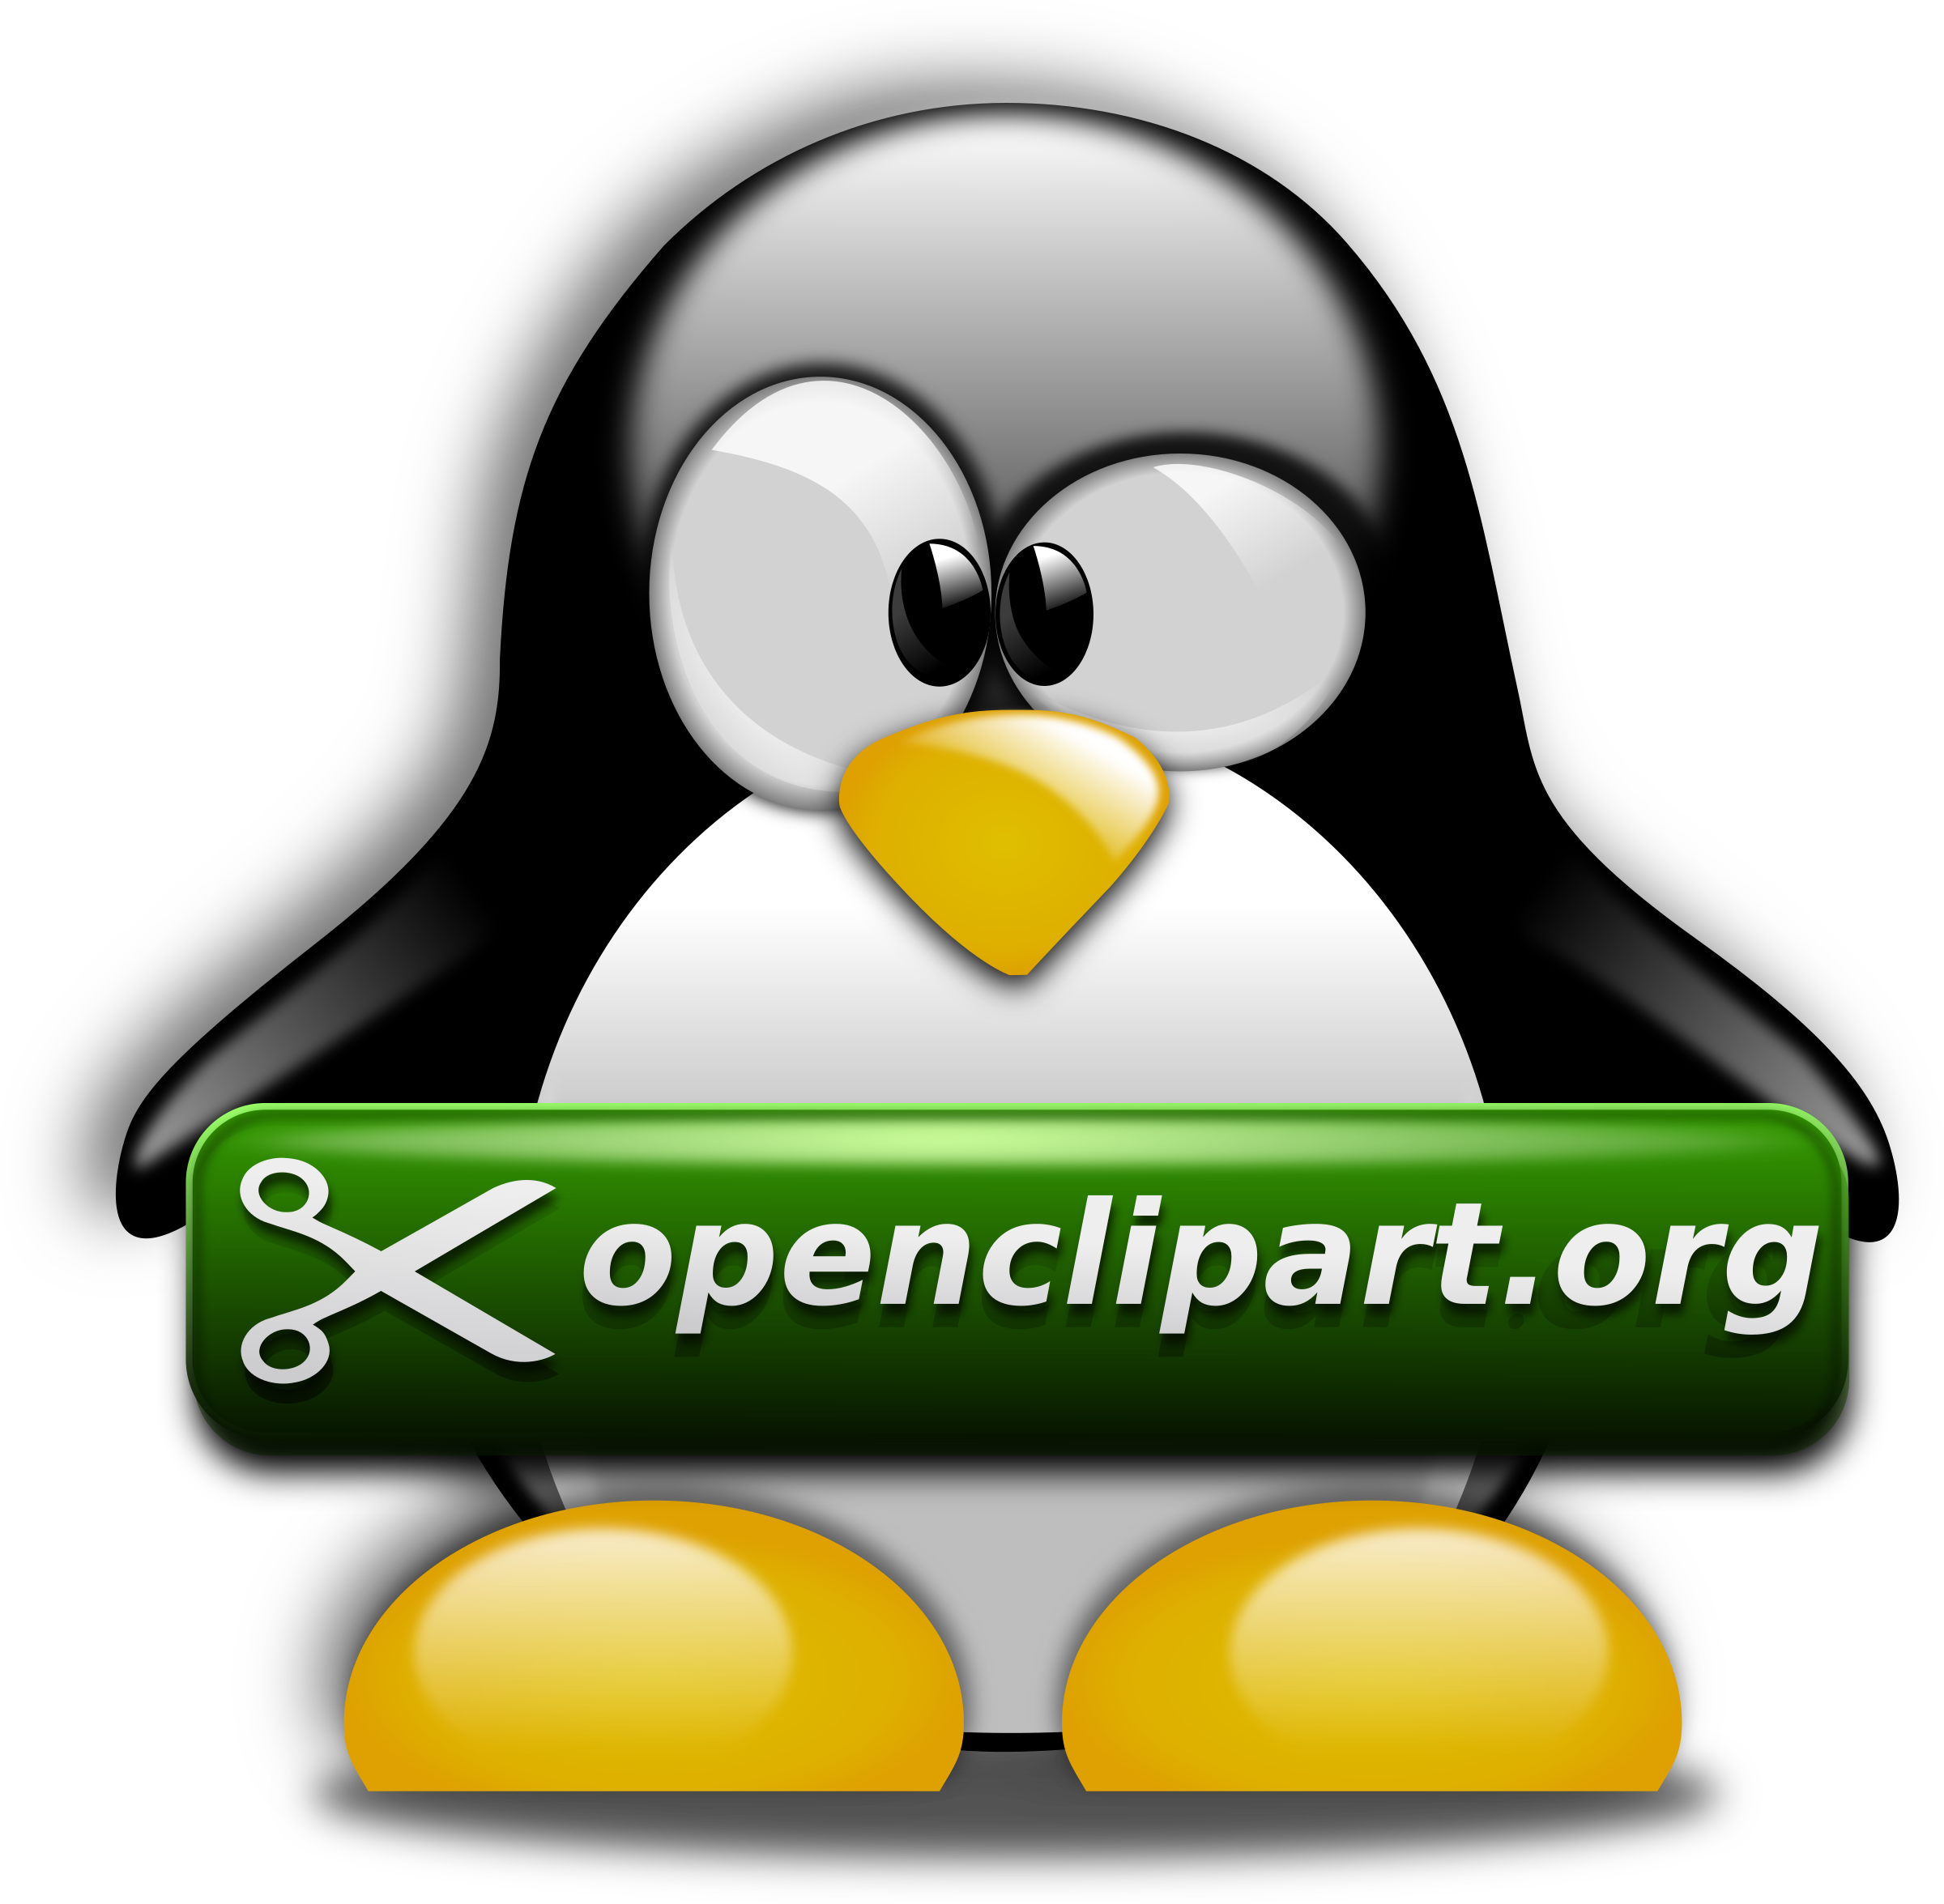 Tux openclipart dot org. Open clipart